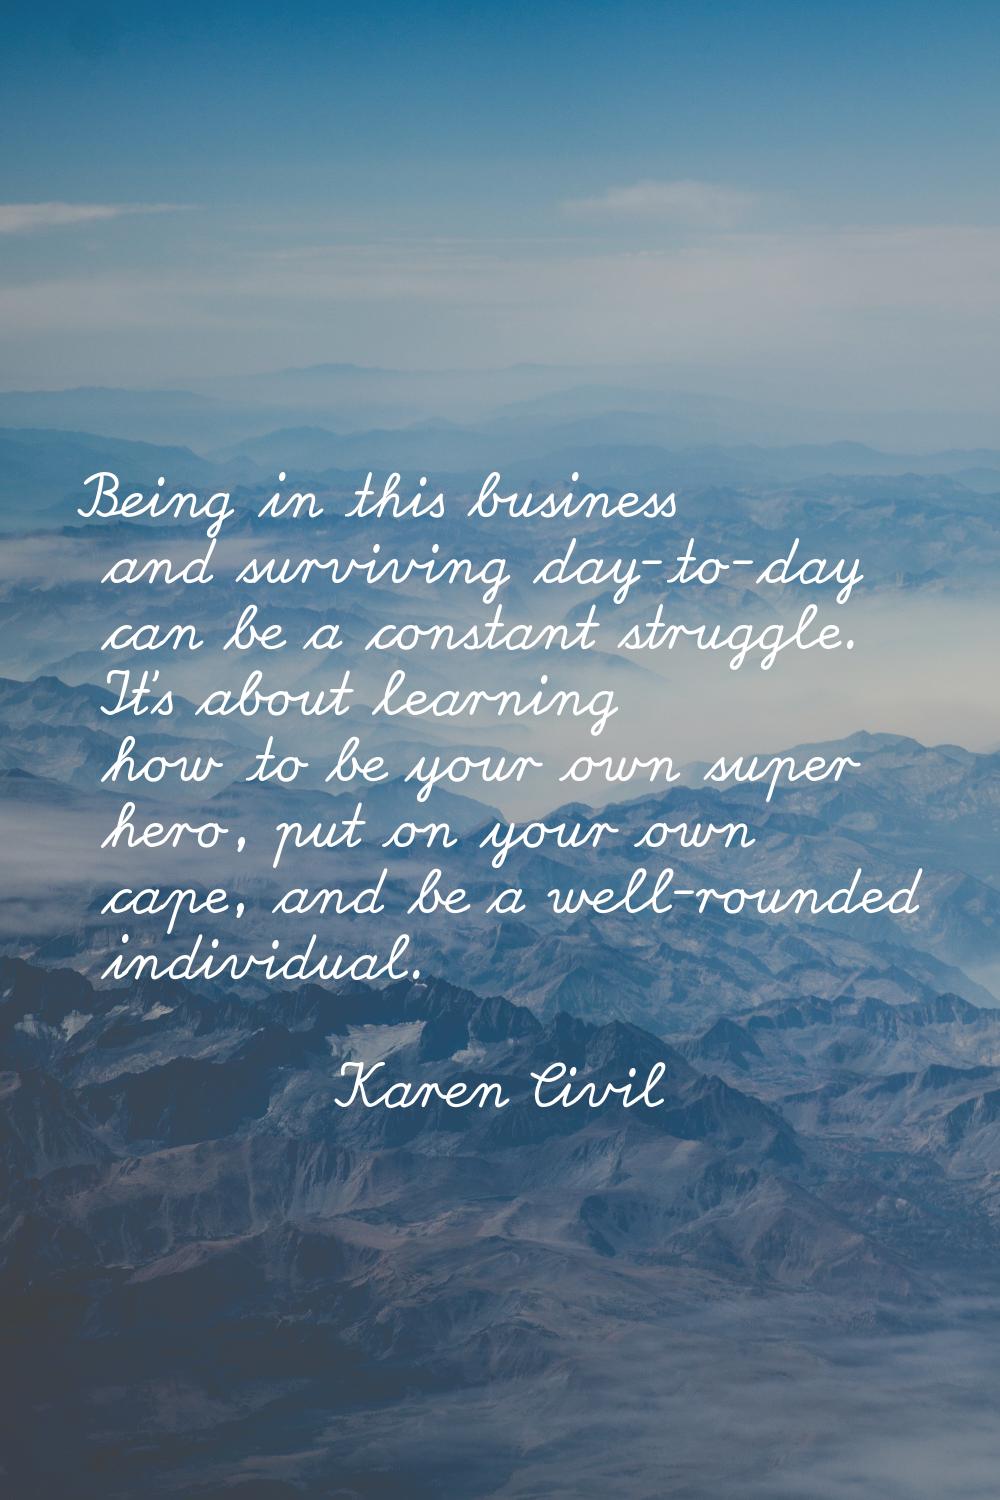 Being in this business and surviving day-to-day can be a constant struggle. It's about learning how